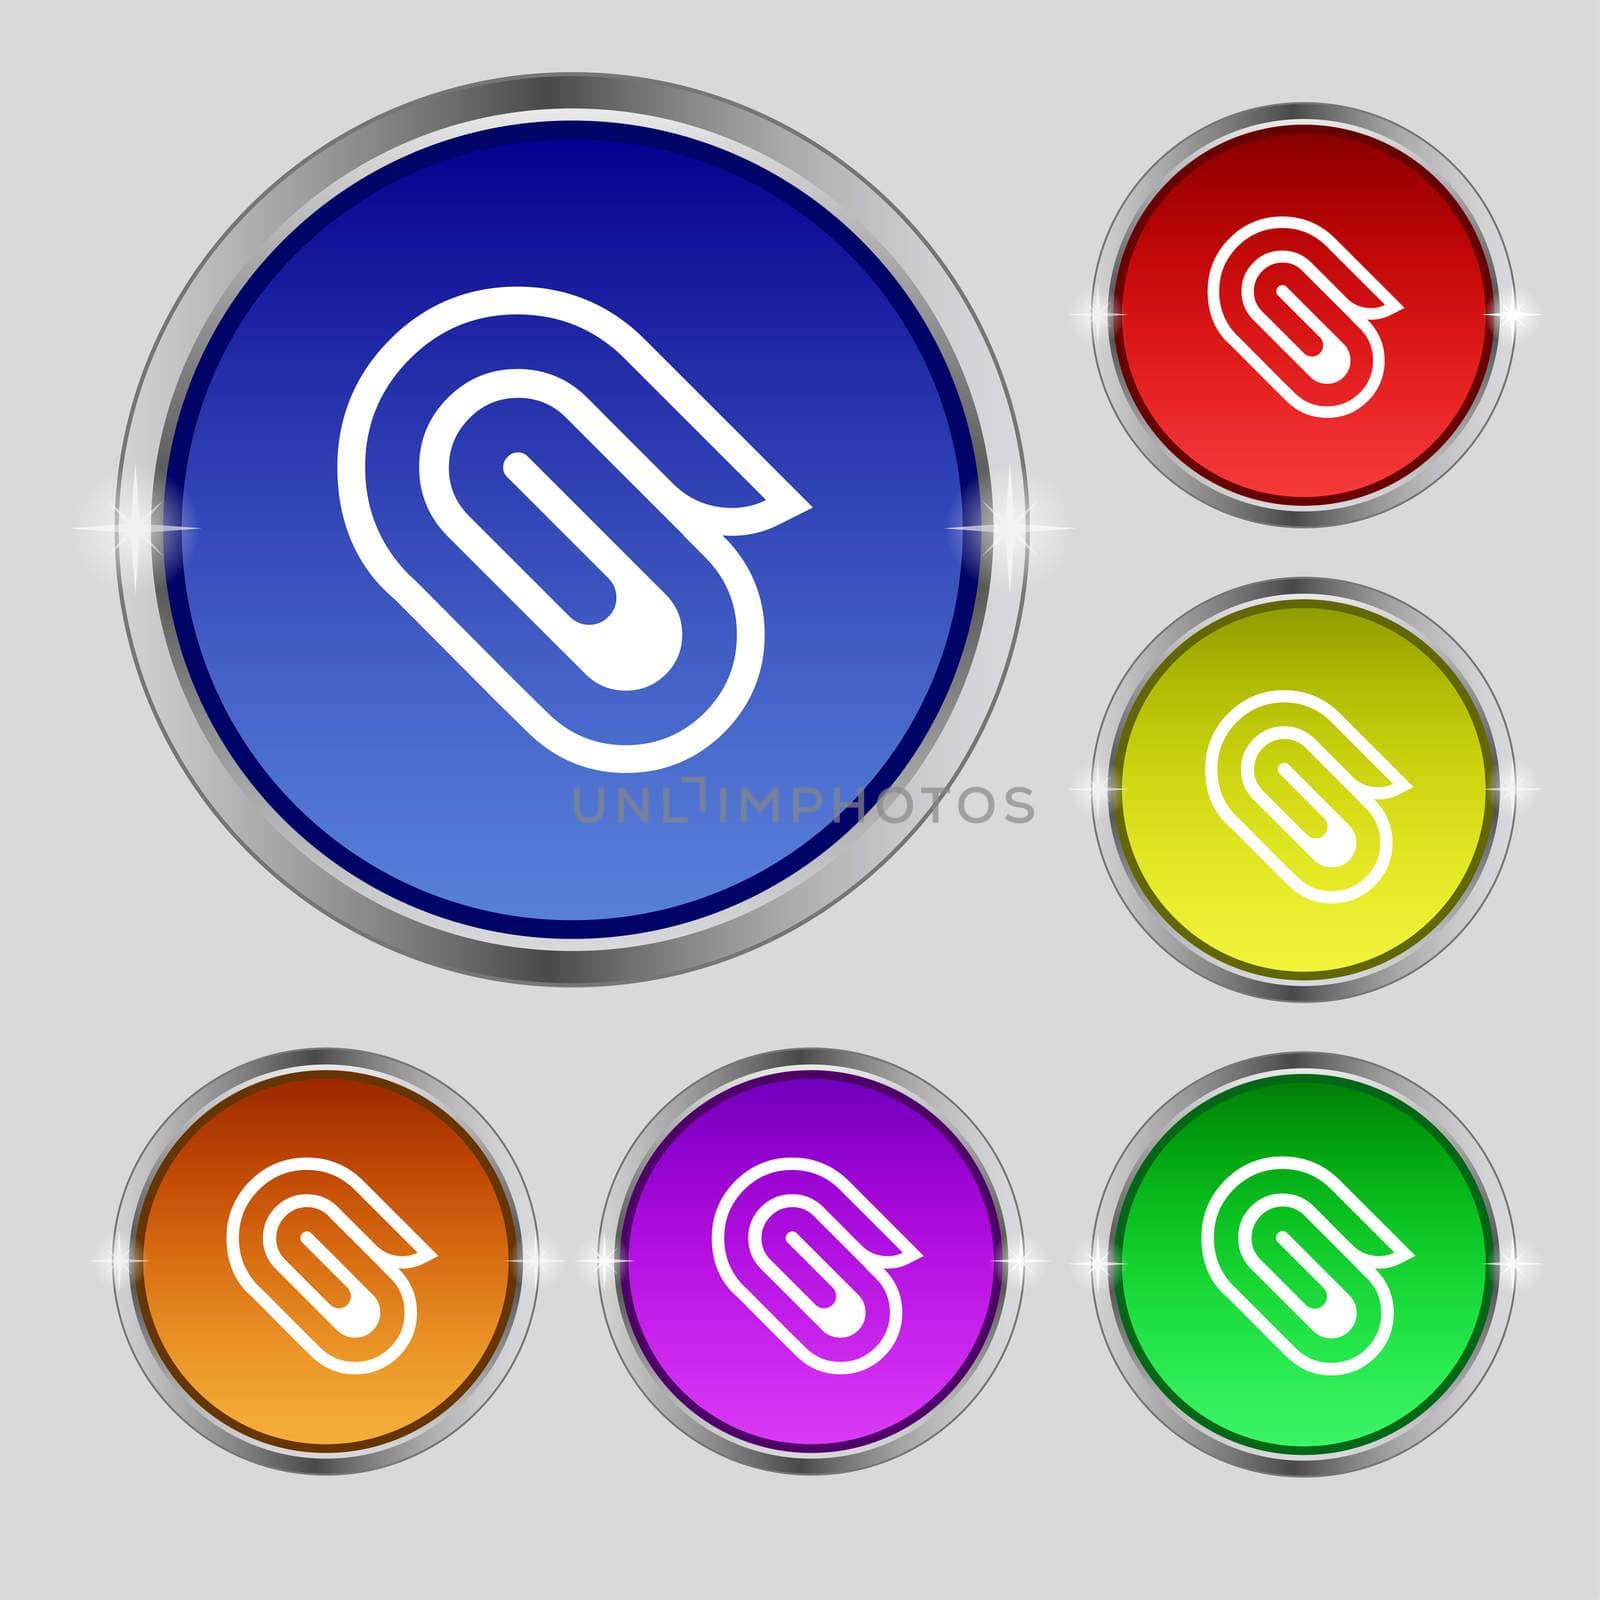 paper clip icon sign. Round symbol on bright colourful buttons. illustration